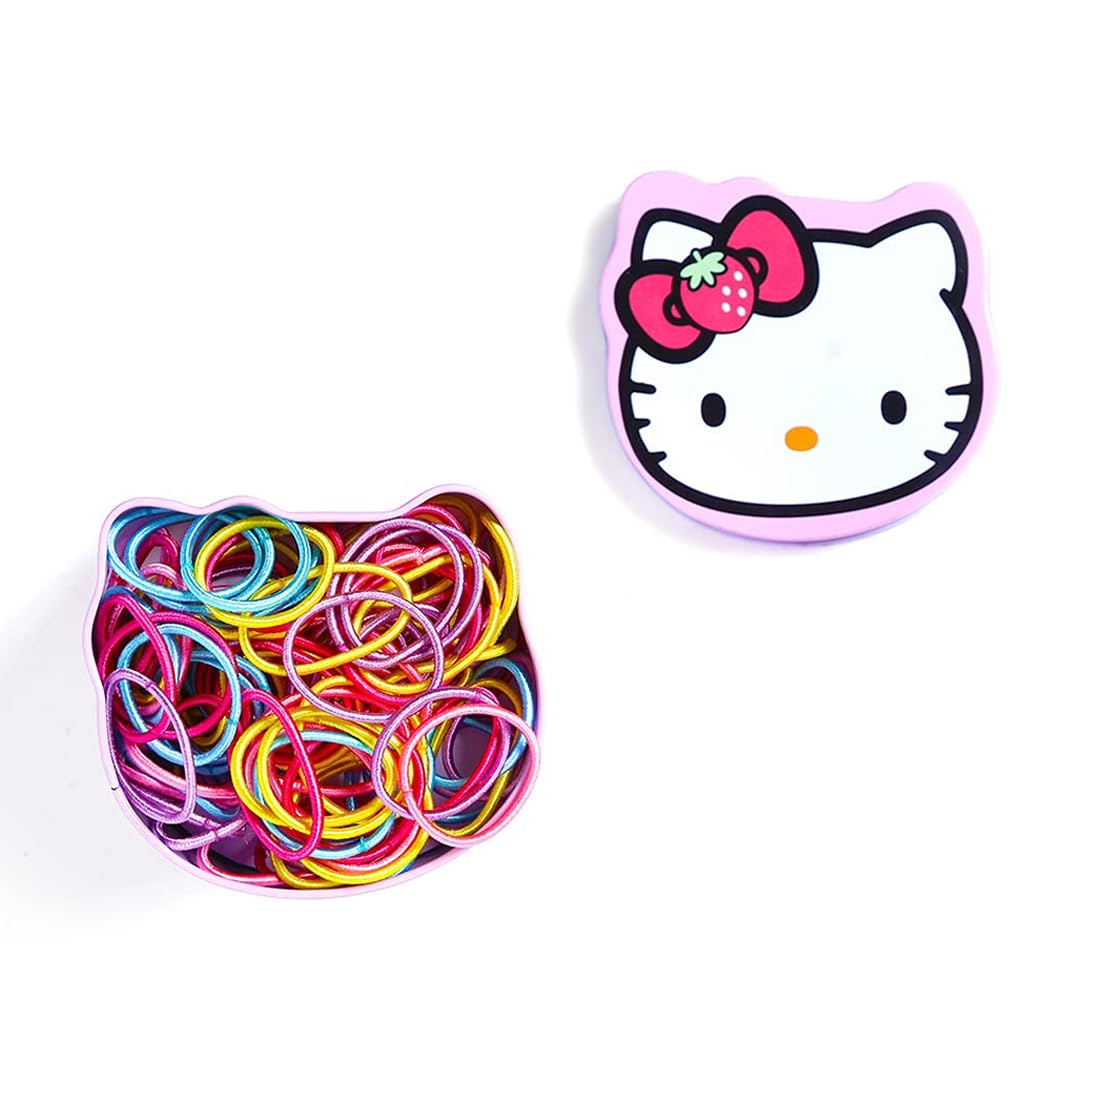 Melbees by Yellow Chimes Hair Rubber Bands for Girls Kids Set of 100 Pcs Rubberbands Multicolor Soft & Stretchy Small Ponytail Holders with Kitty Tin Storage Box for Girls Kids Teens Toddlers